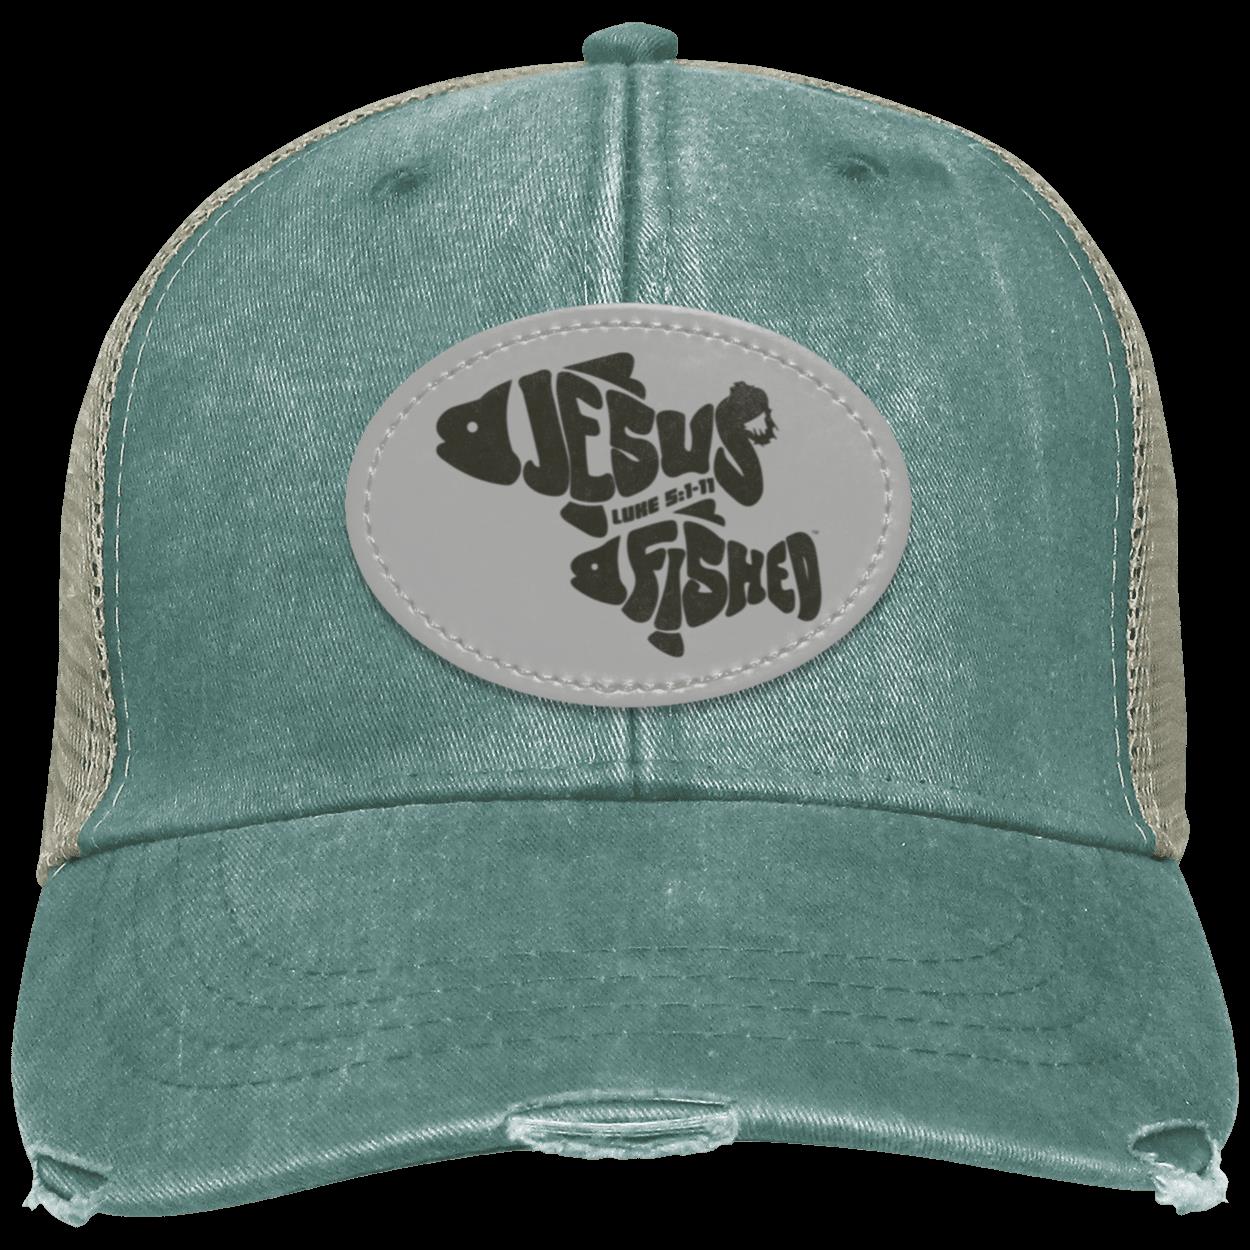 OneFish TwoFish Distressed Ollie Cap - Oval Patch